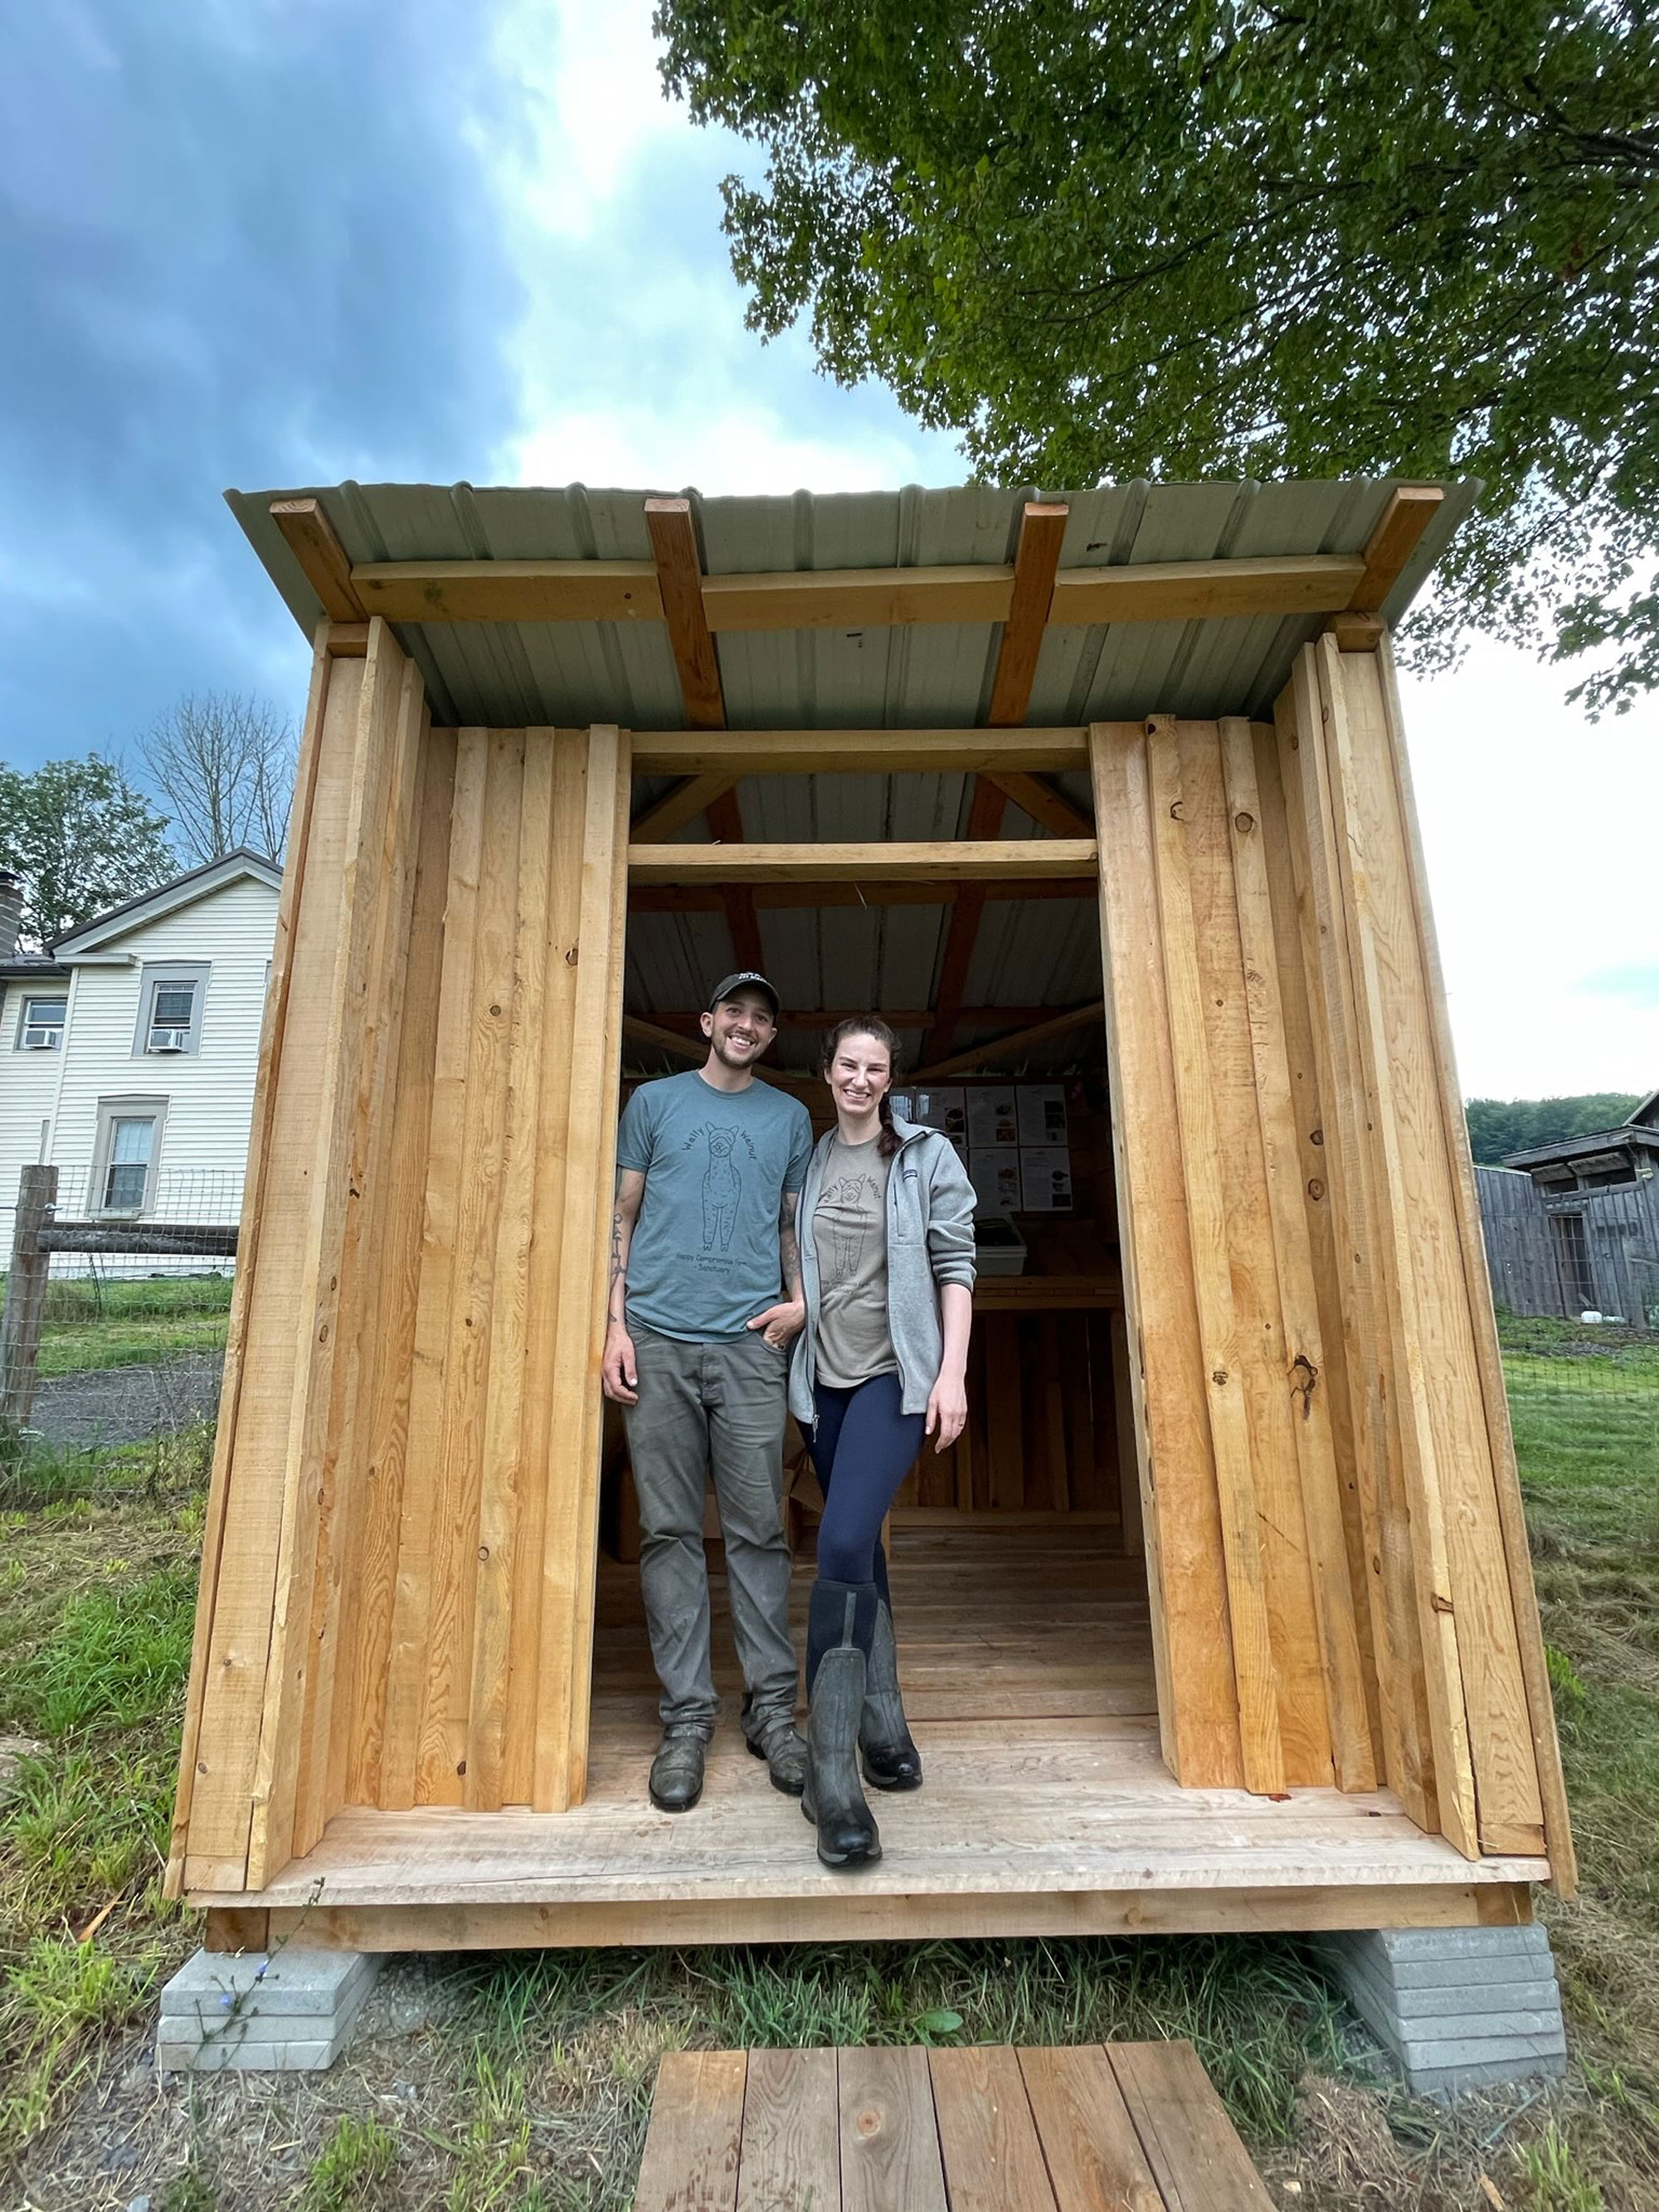 Oliver Gawlick and Eryn Leavens in the doorway of the new free farm stand they constructed for their community